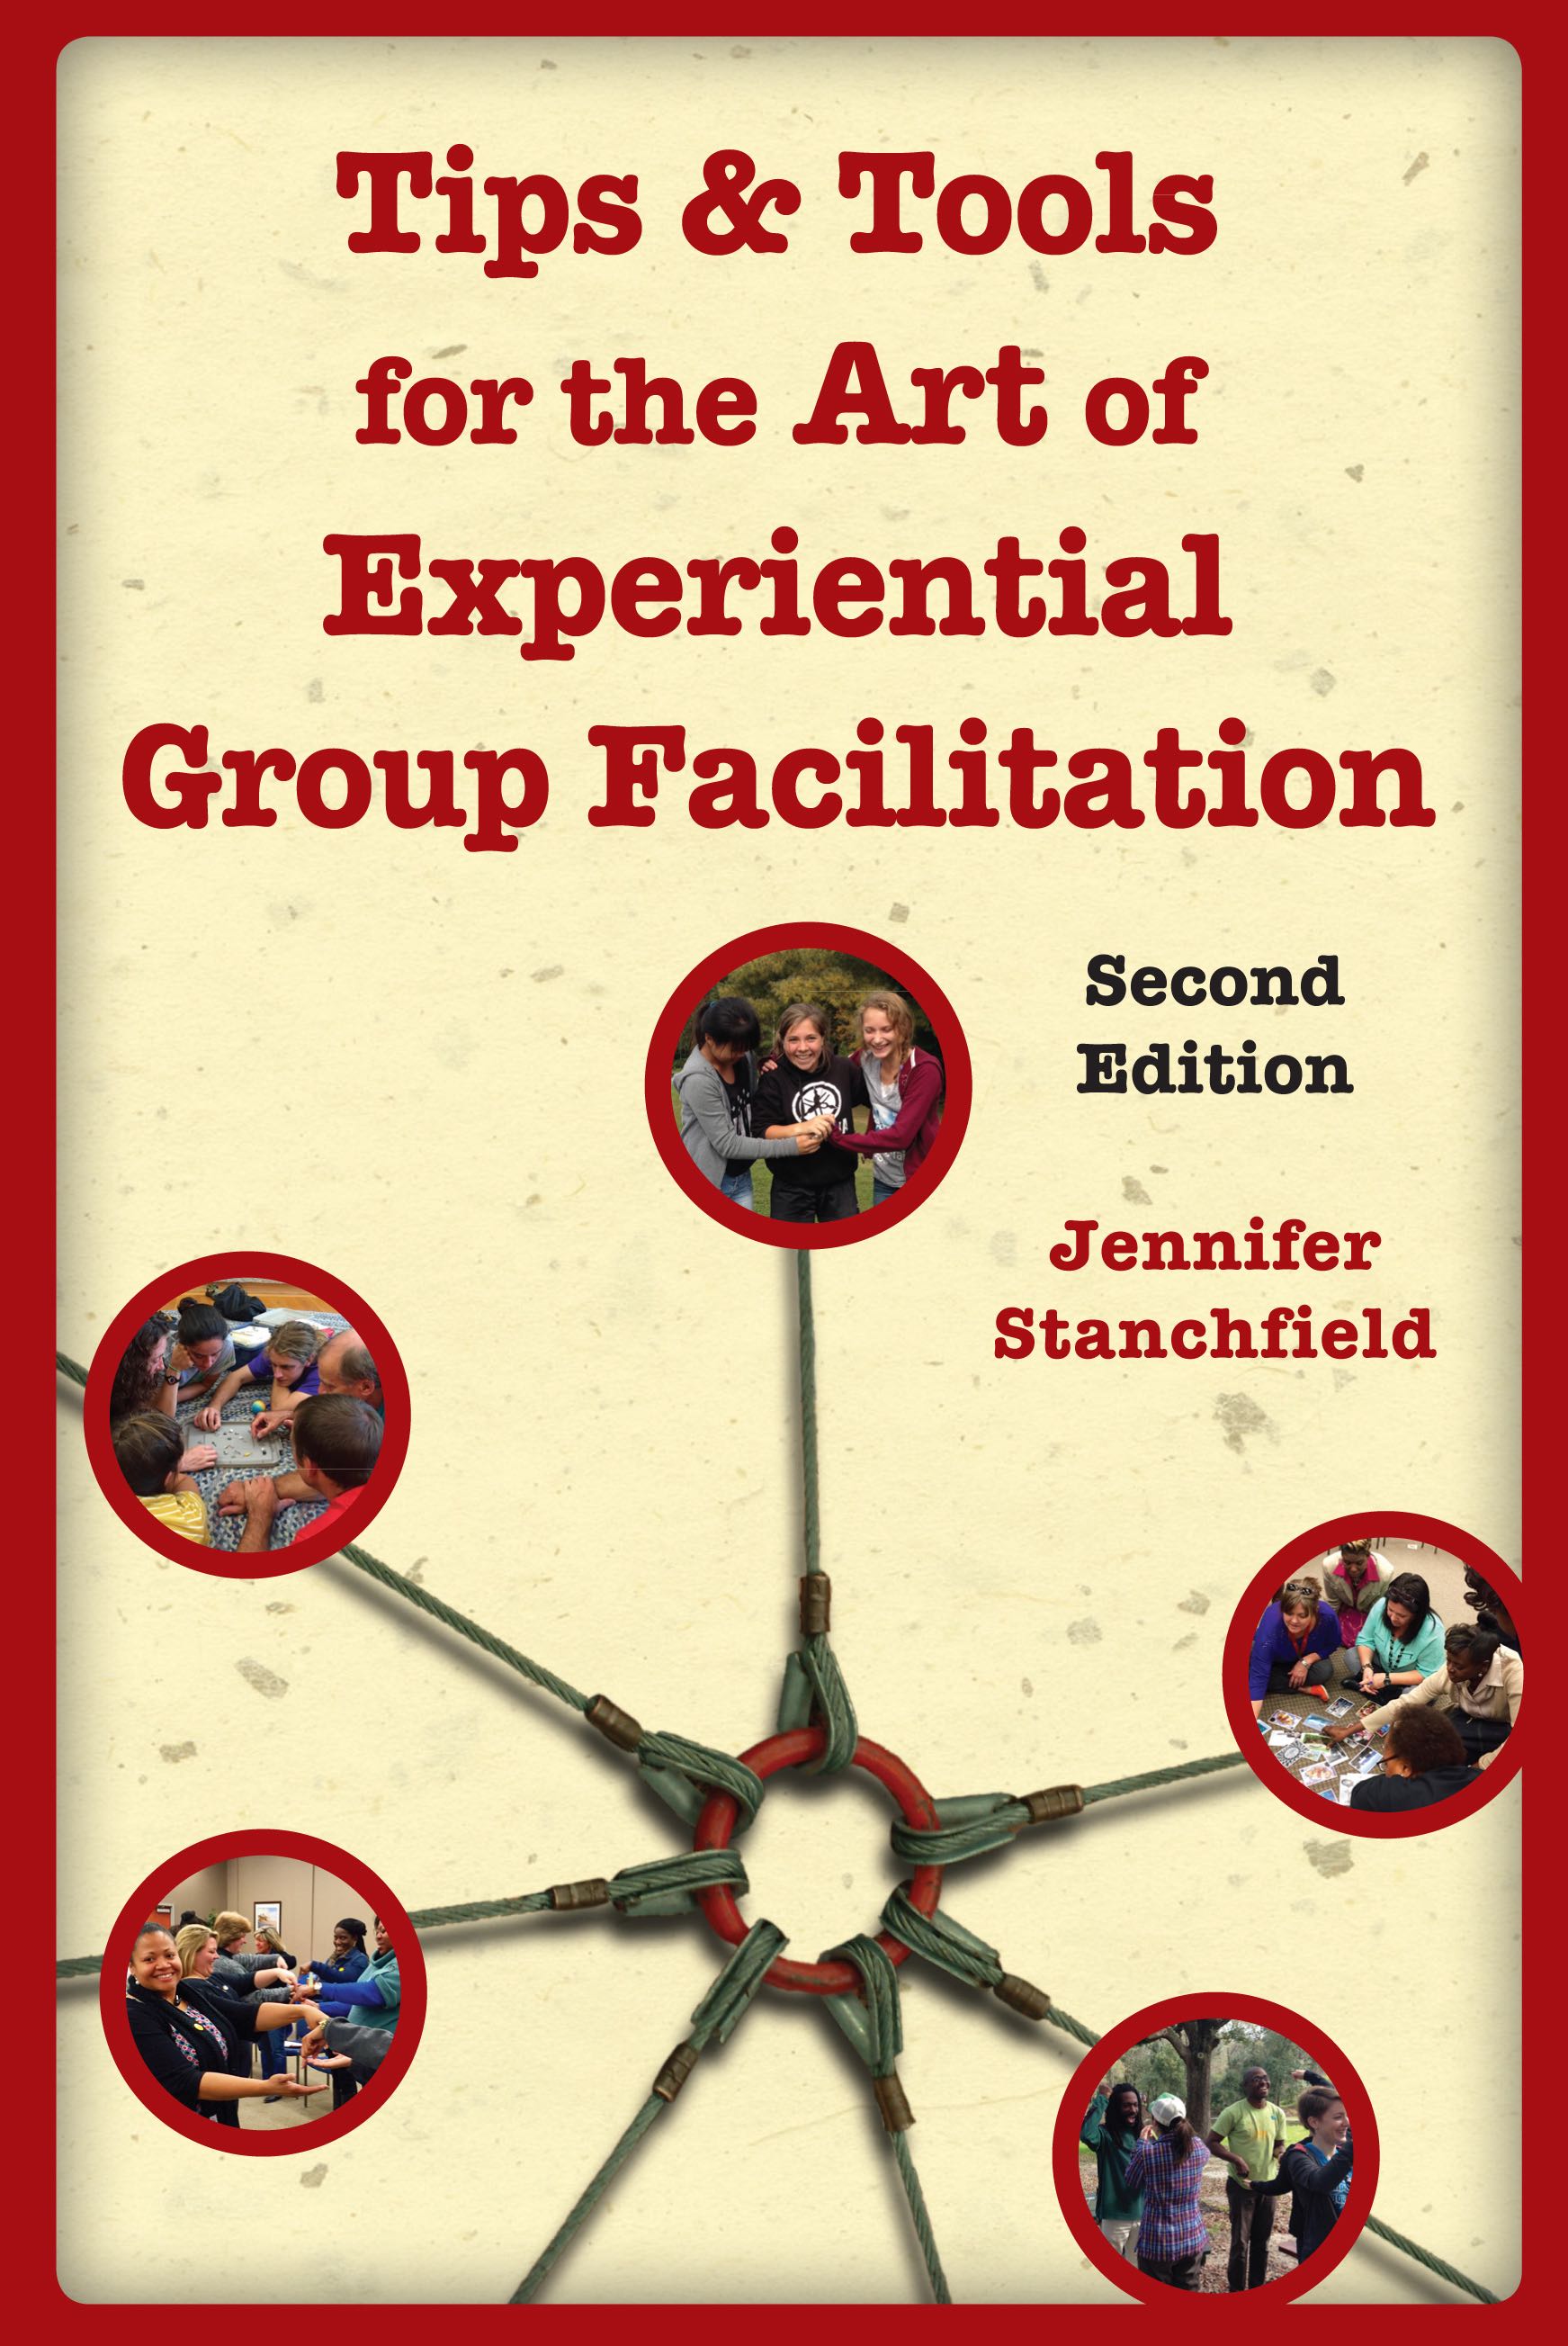 Tips & Tools for the Art of Experiential Group Facilitation • St. Louis, MO